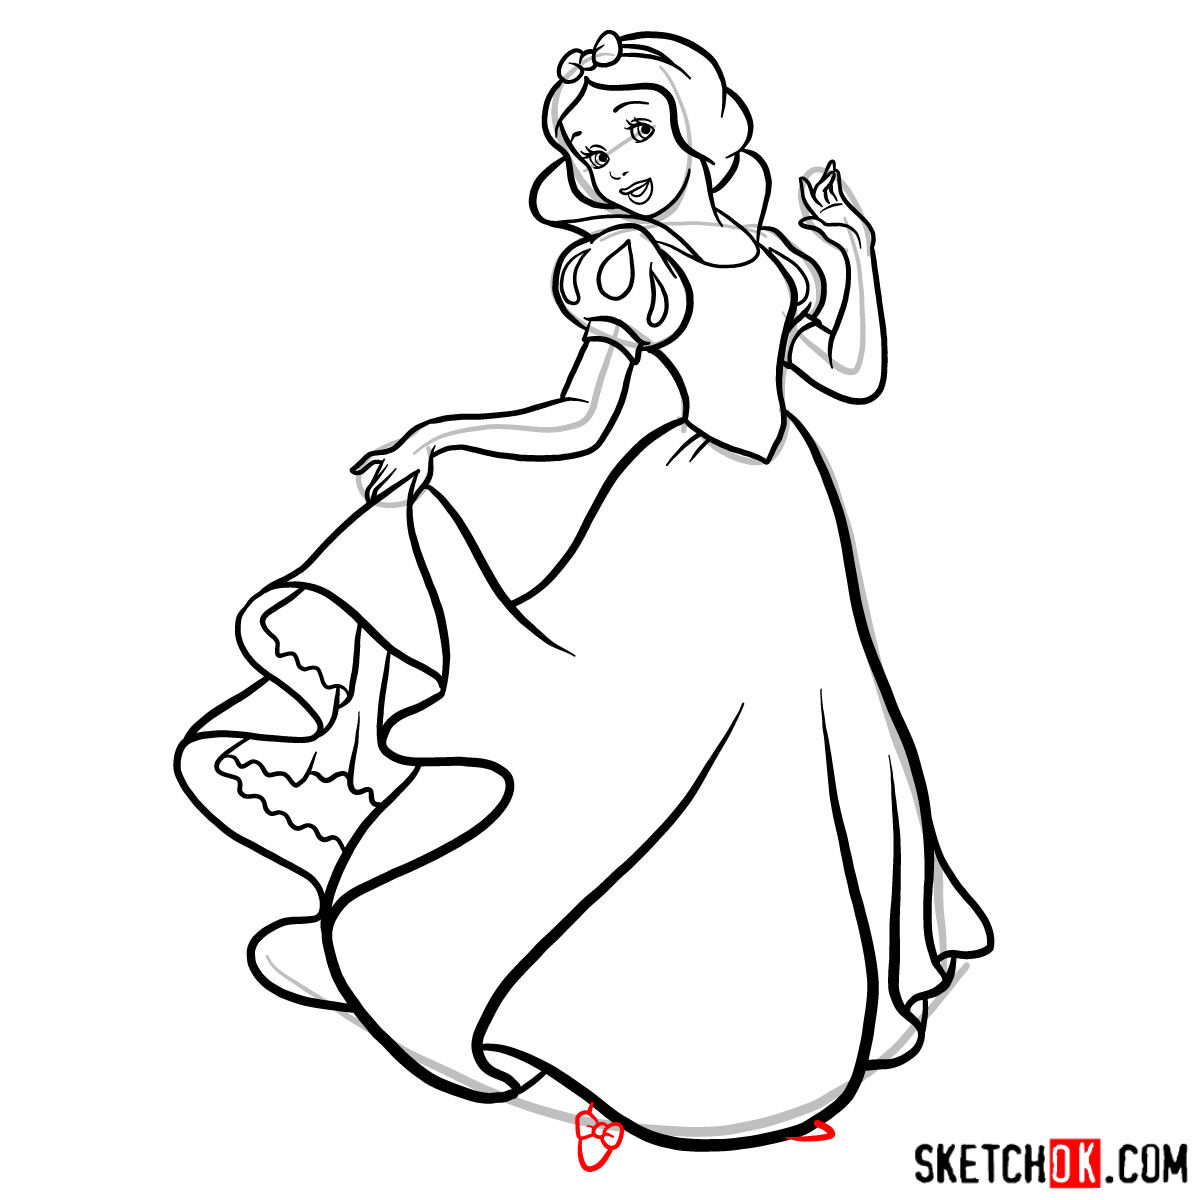 How to draw Snow White - step 14